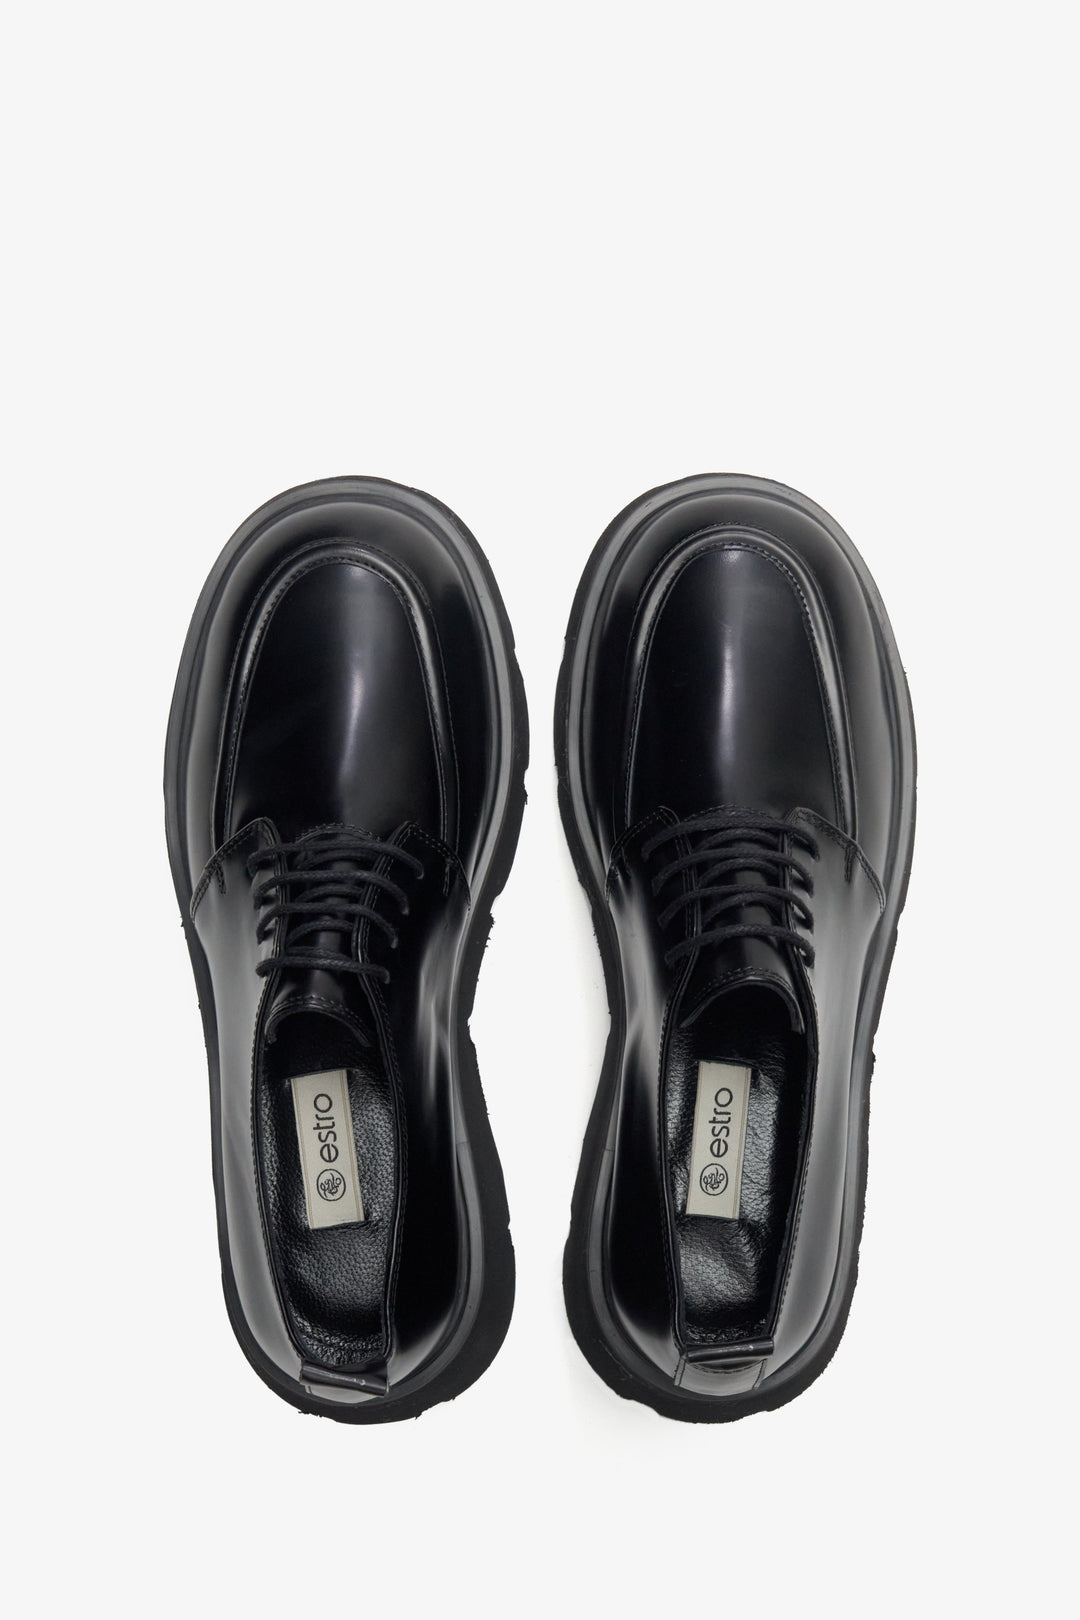 Women's black leather lace-up shoes by Estro - top view presentation of the model.